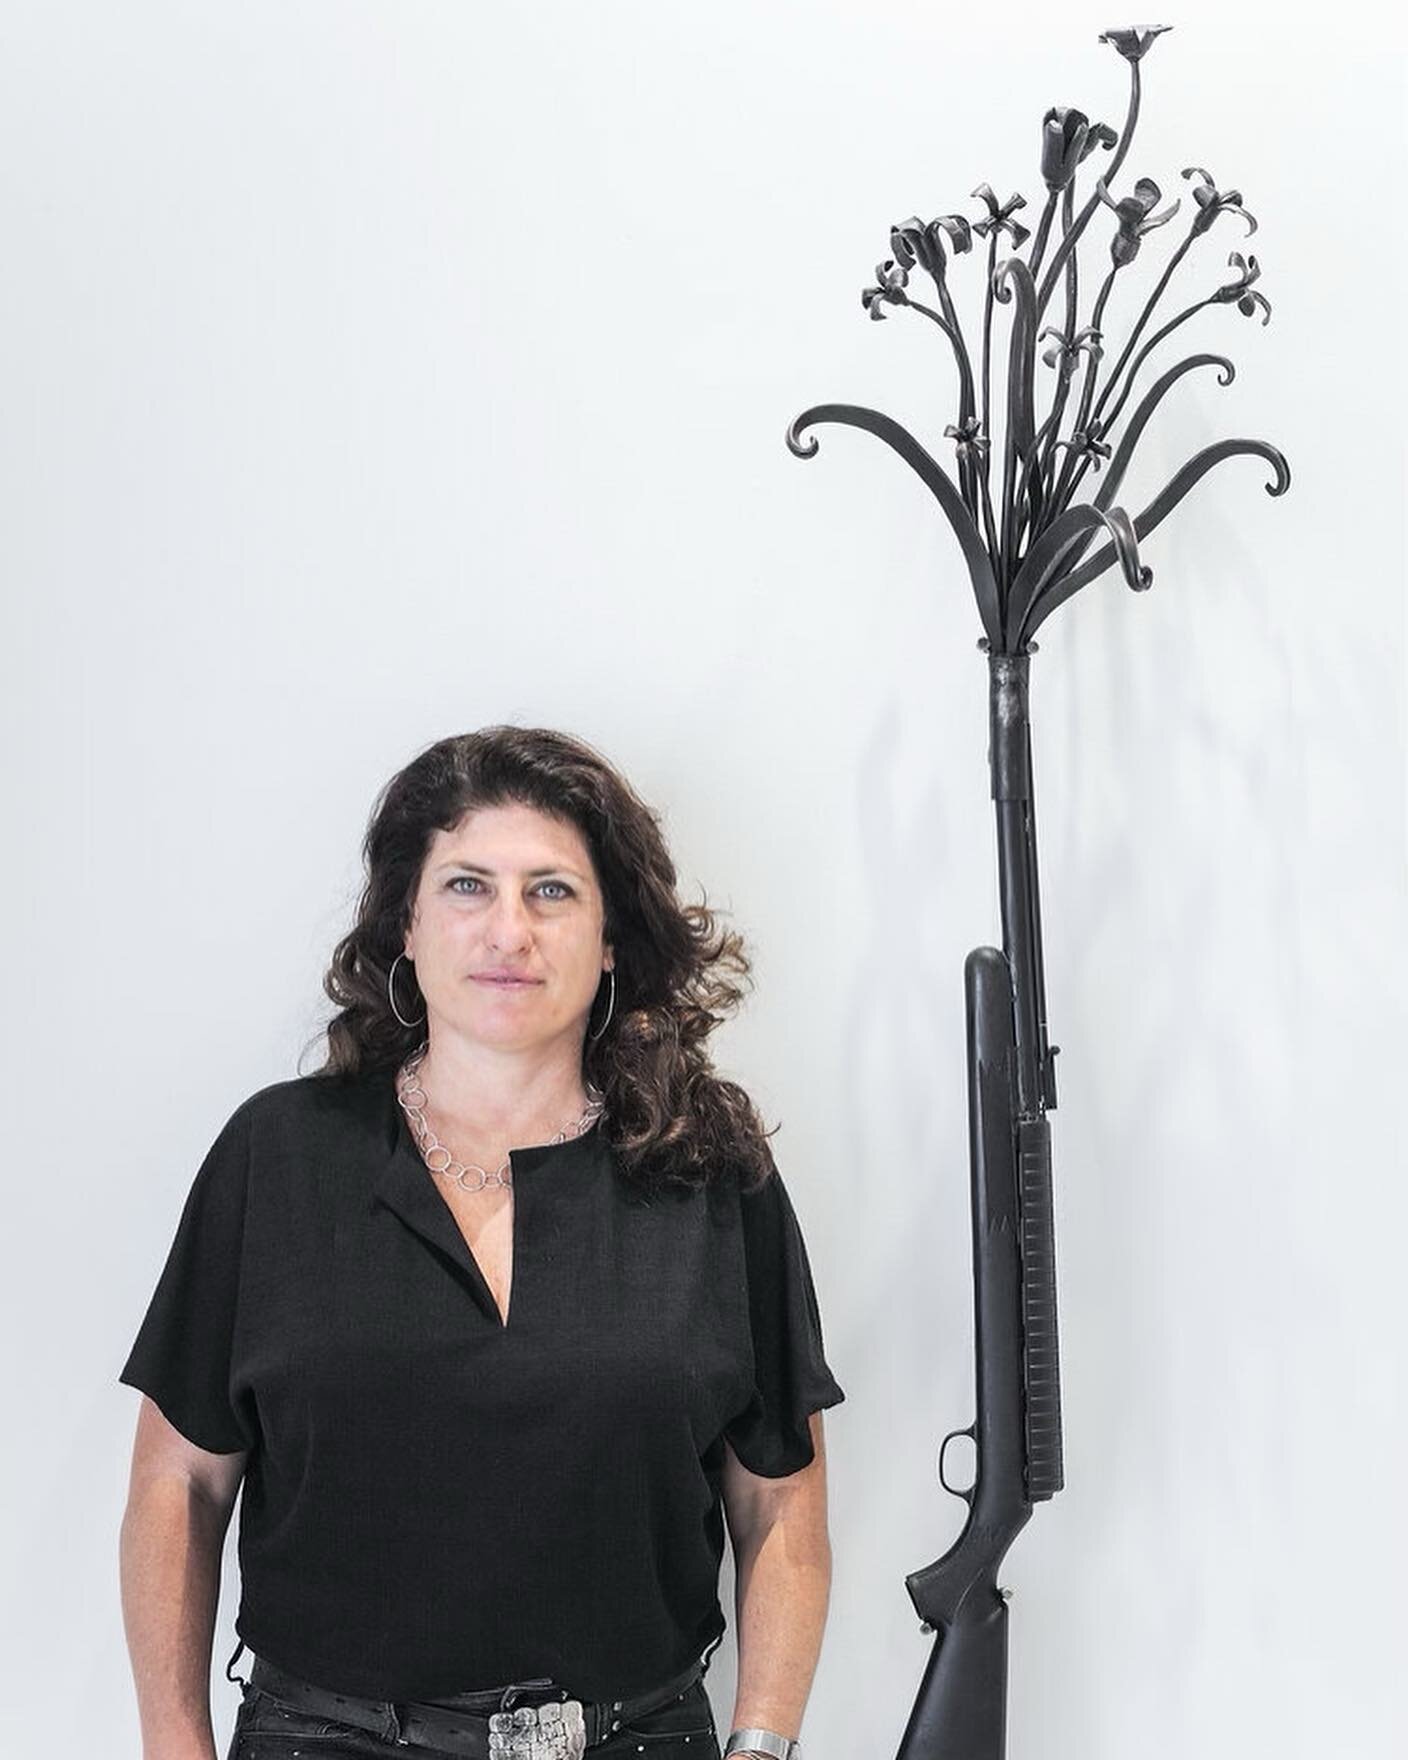 Congratulations to @corrinasephora.metalartist who is in a group show &ldquo;Out of the Ordinary&rdquo; at @spaldingnixfineart.

Corrina is a mixed media artist who specializes in metal sculpture, painting and installation. She works with universal a